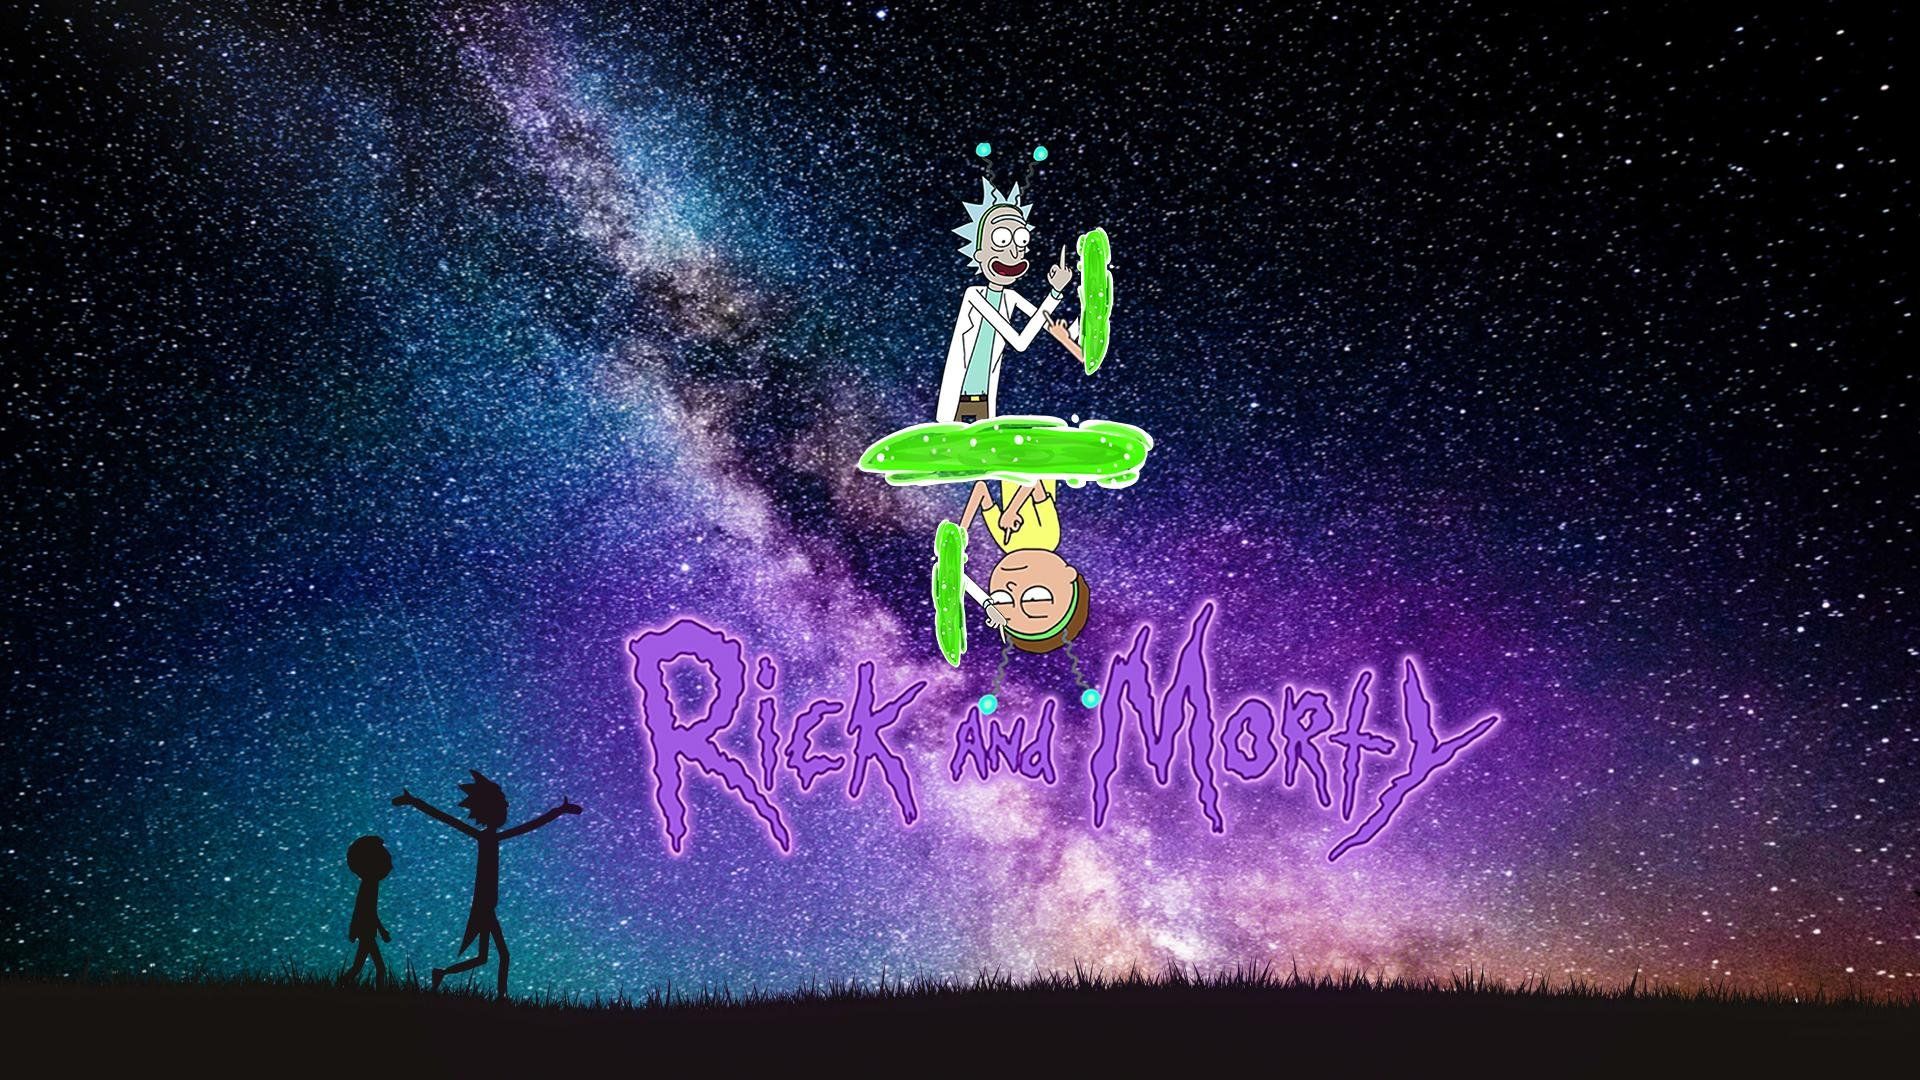 Coolest PC Minimalist Rick And Morty Wallpapers Wallpaper Cave